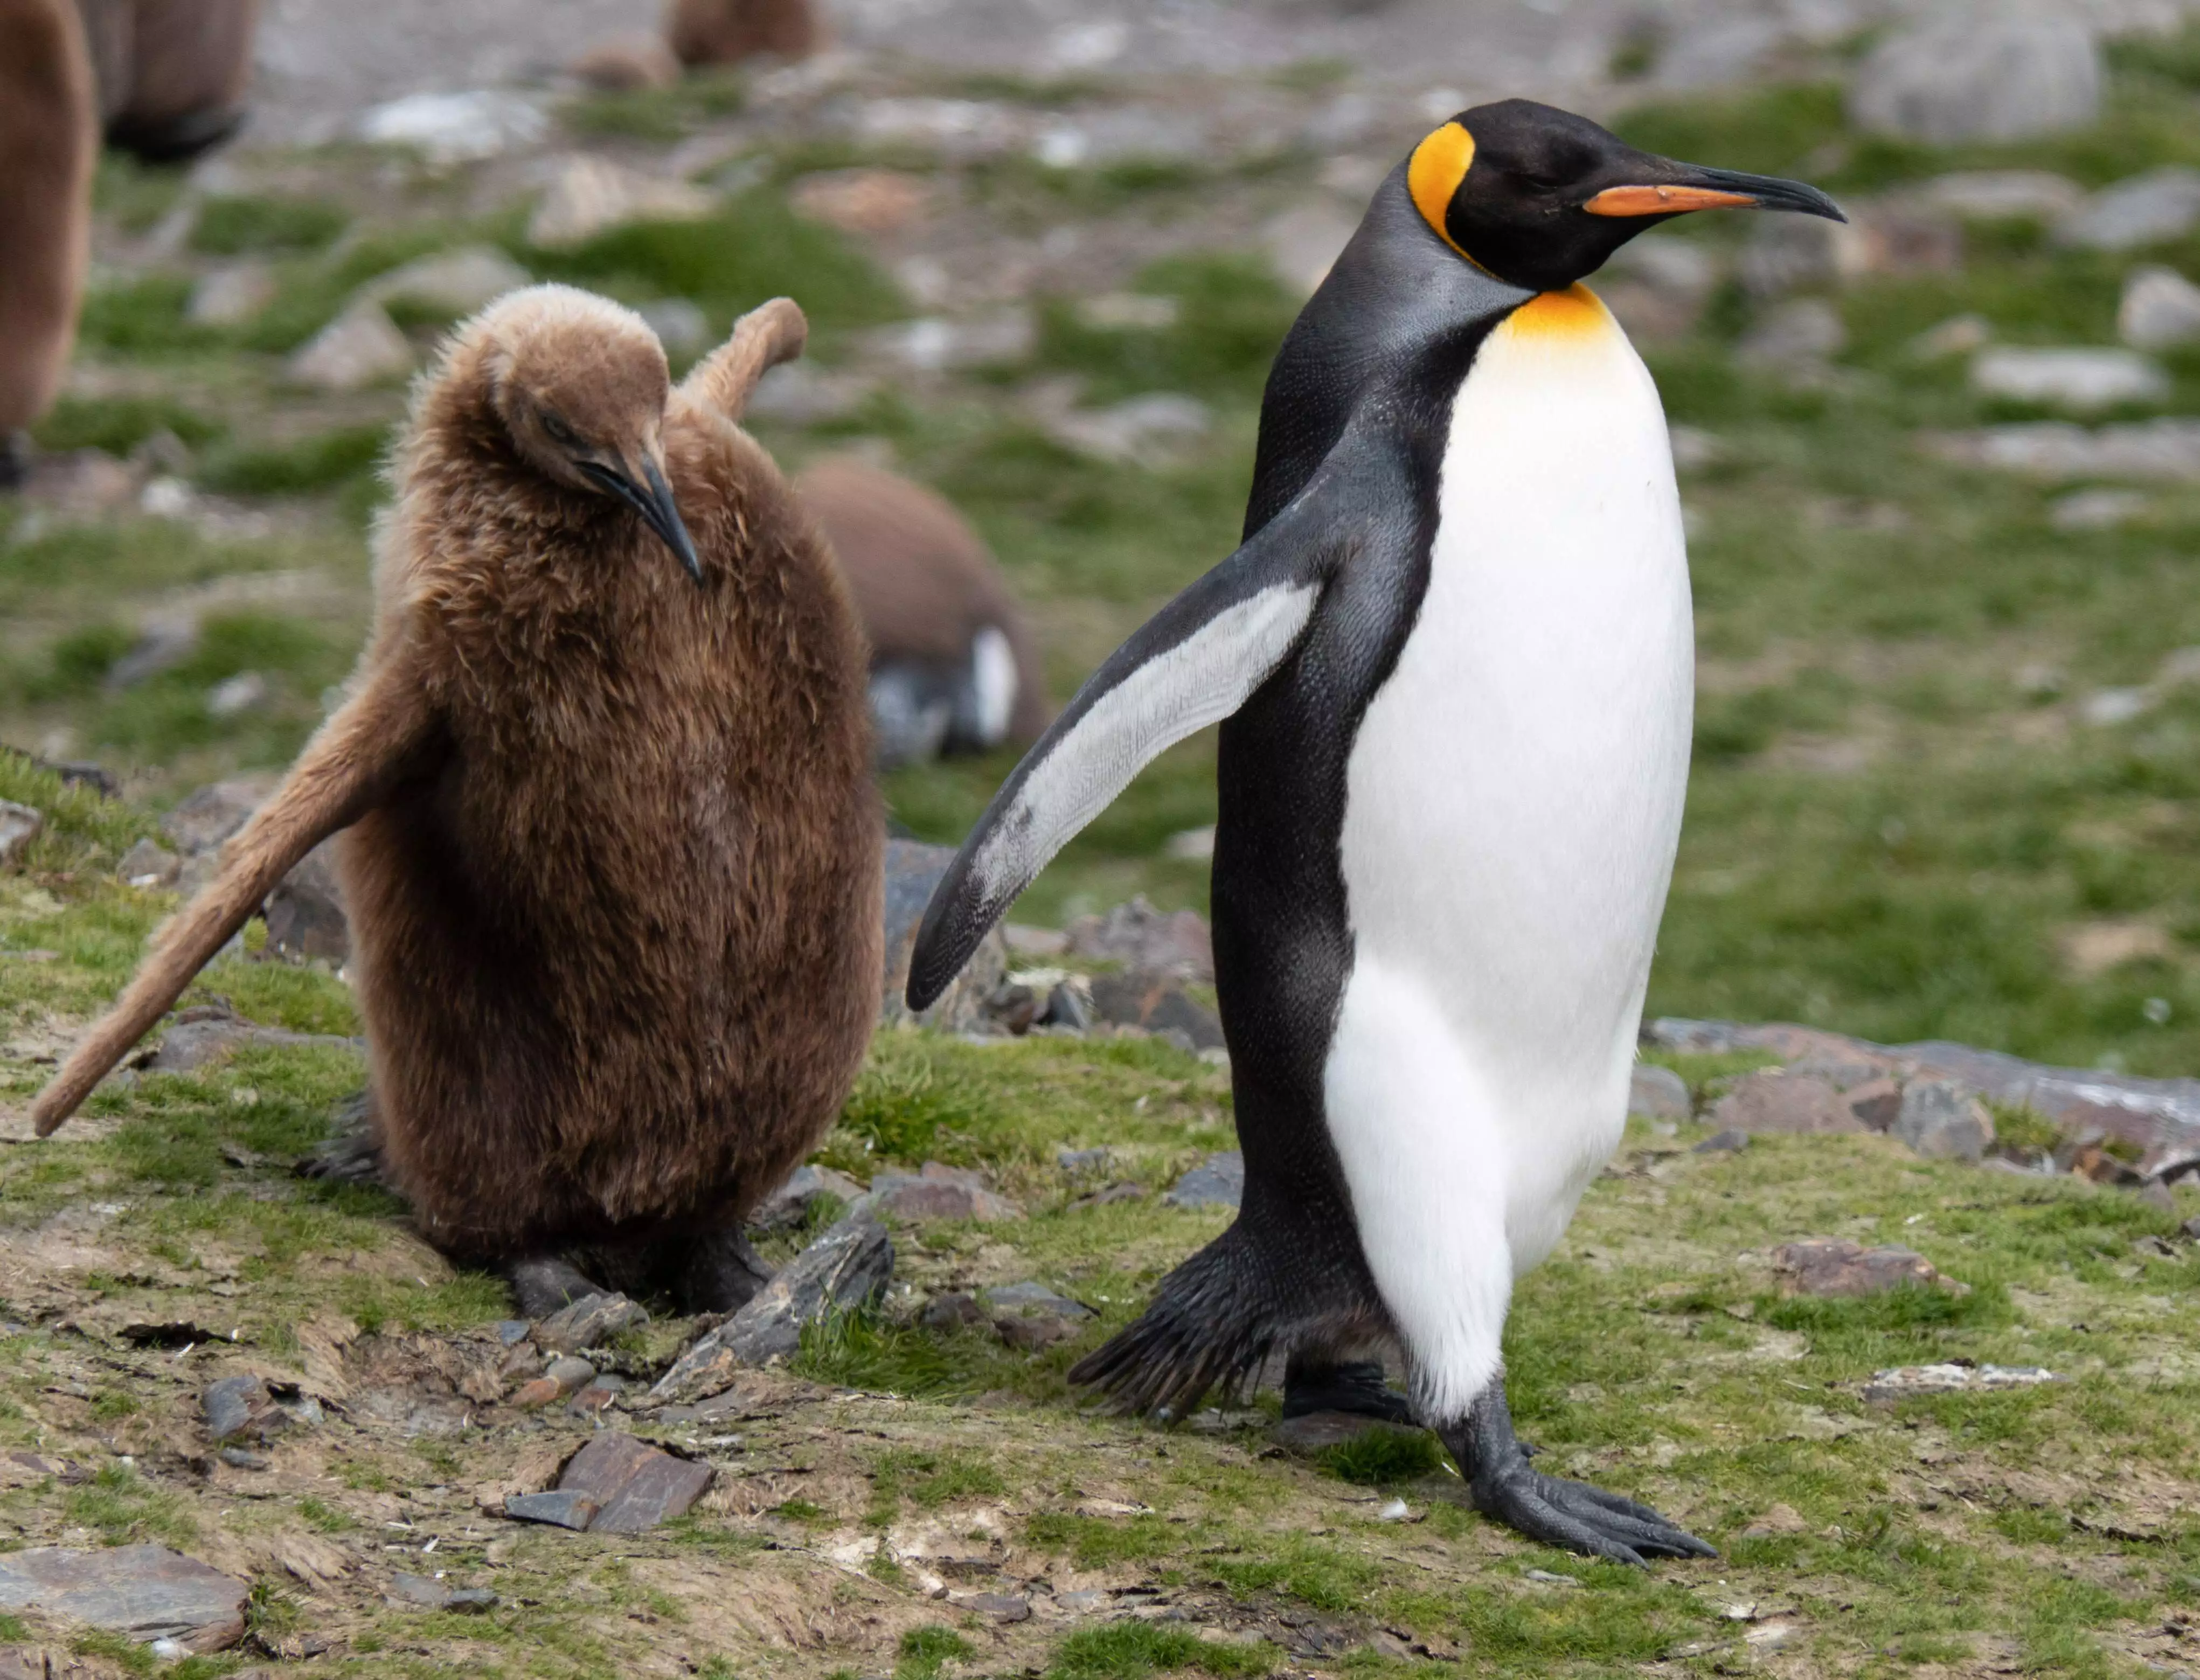 Penguin with its chick: What is a third party?